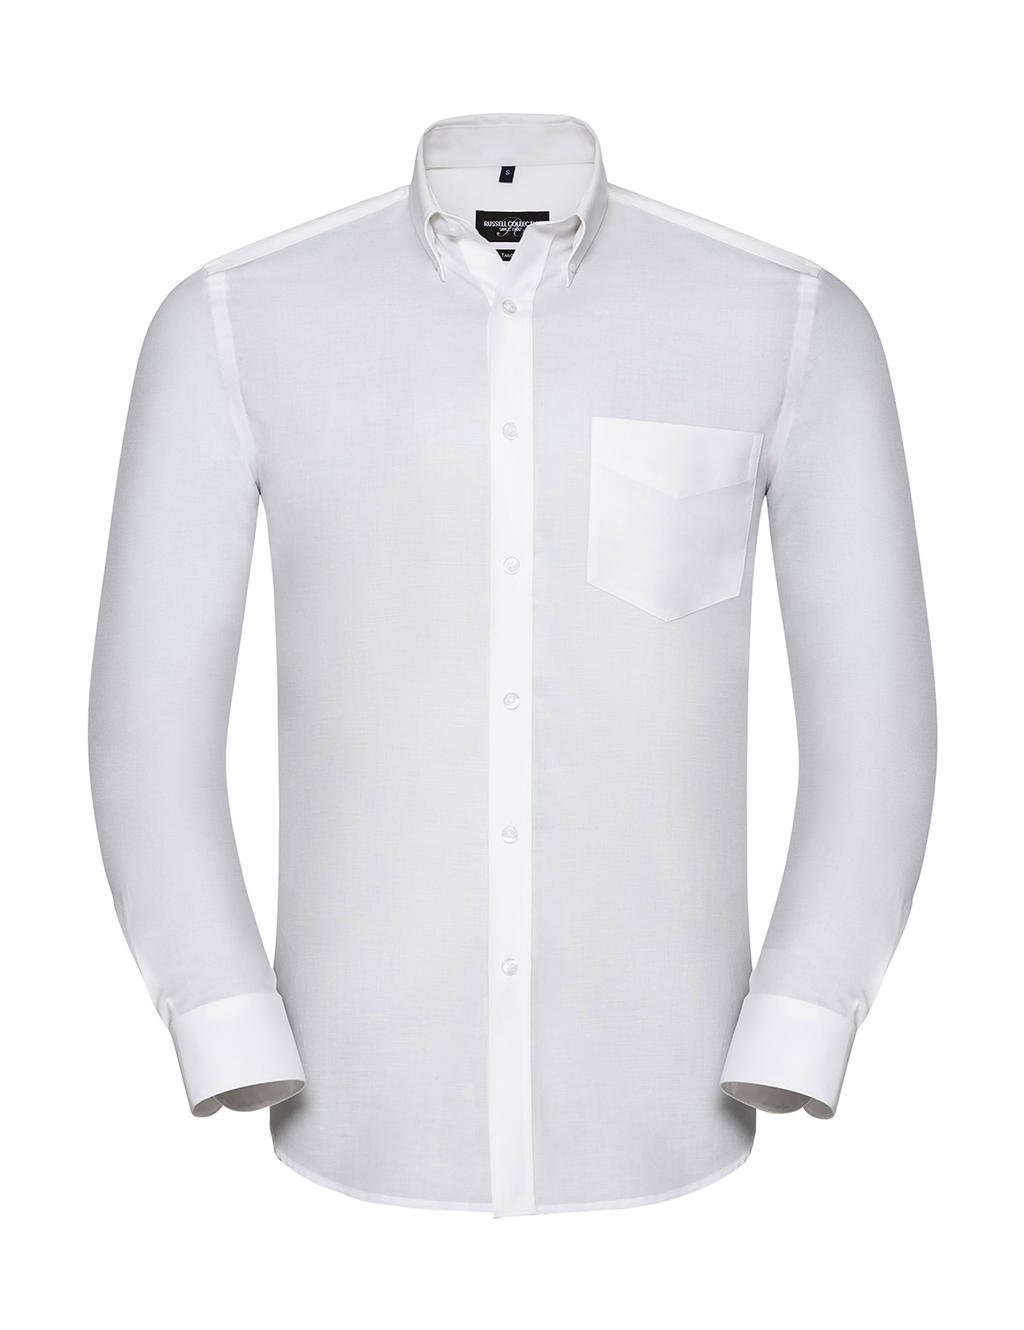  Mens LS Tailored Button-Down Oxford Shirt in Farbe White